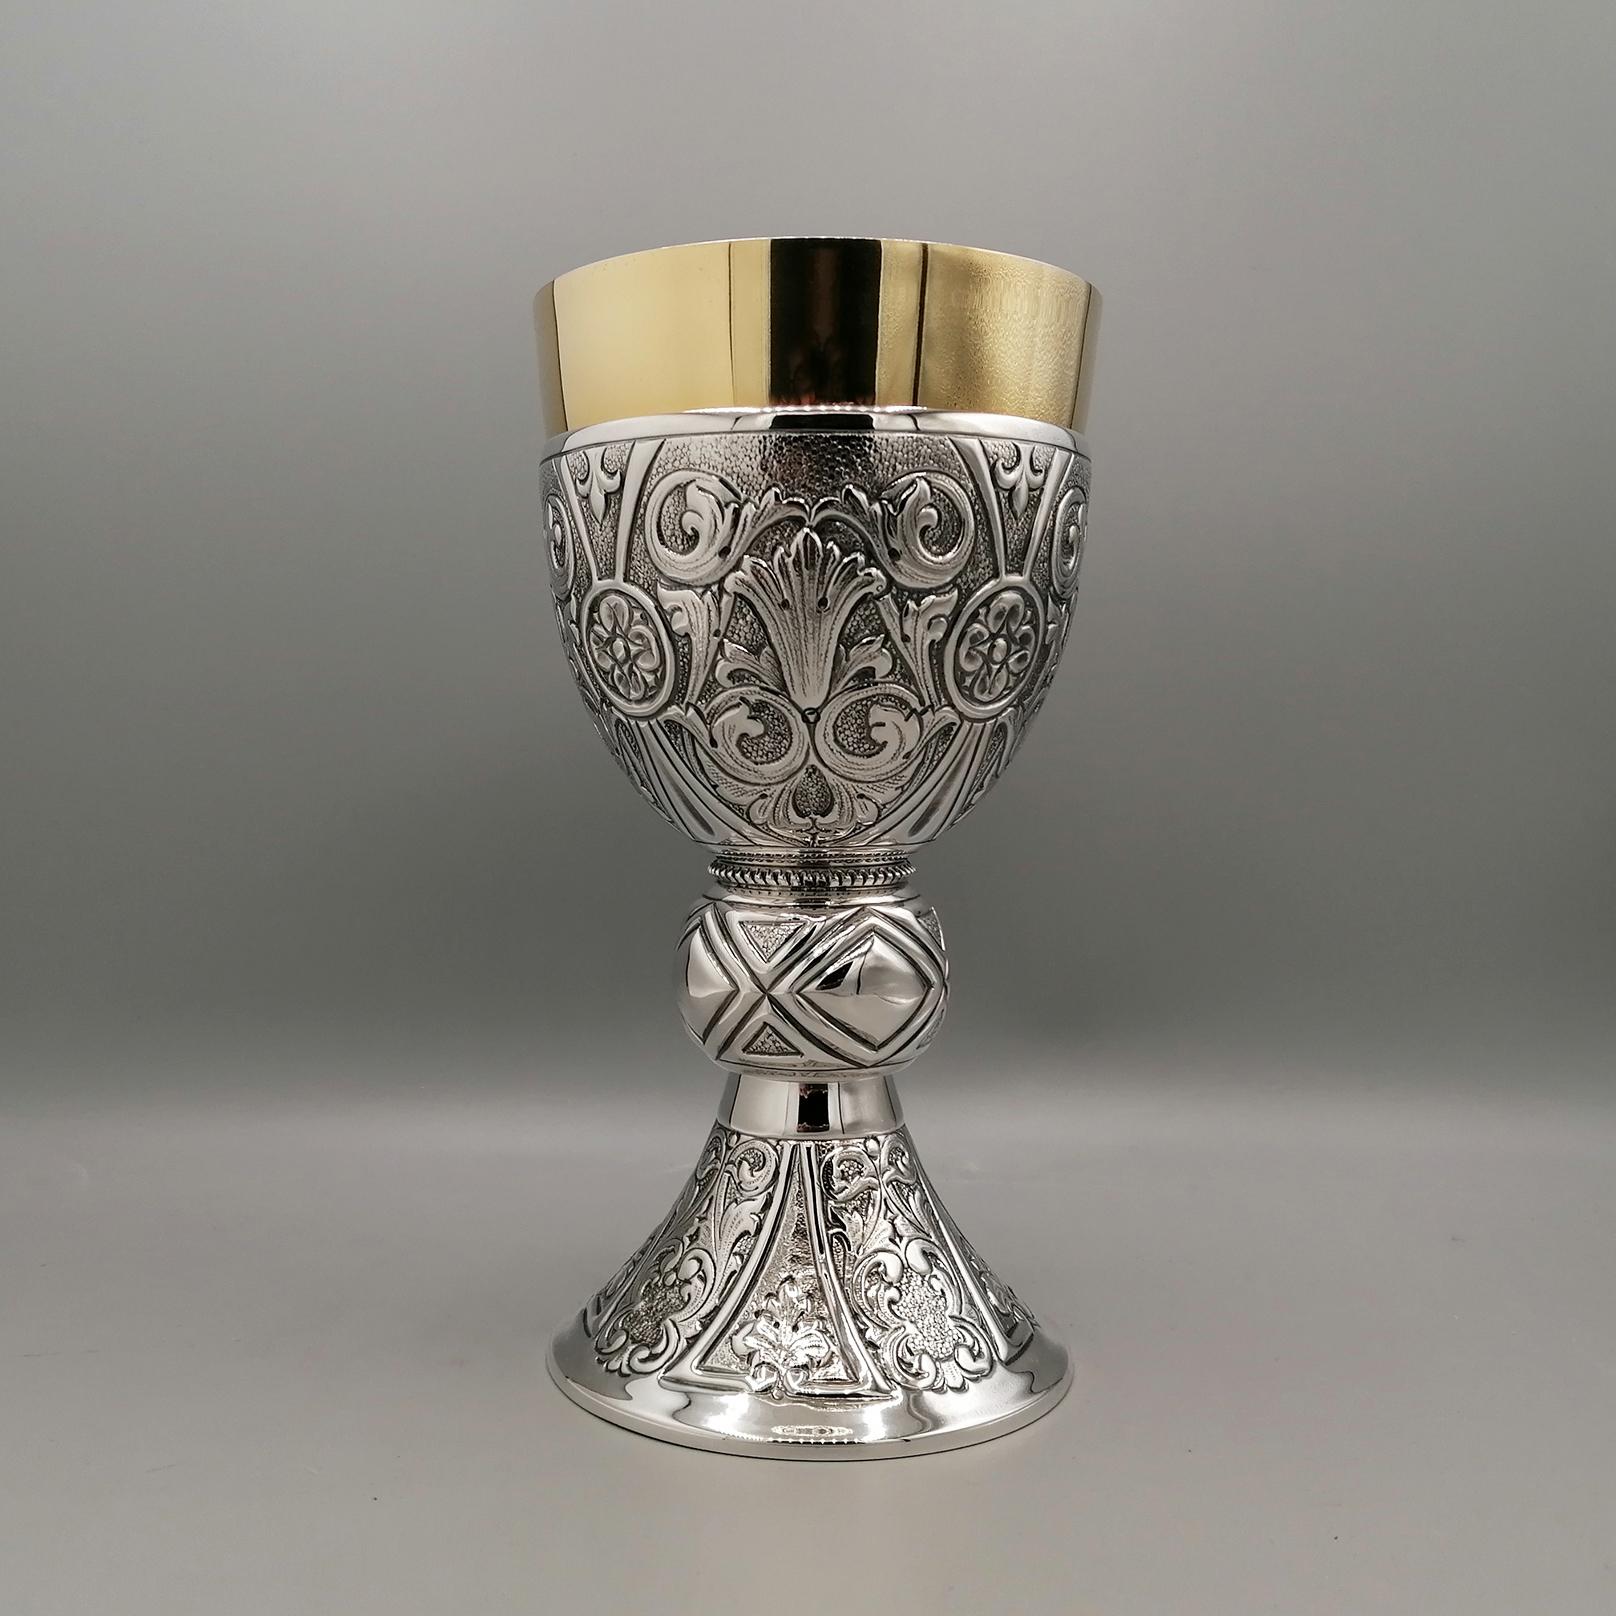 Liturgical chalice made of sterling silver. 
Chalice with a round and elegant shape, features an embossment over its entire surface
On the cup and base, embossing and chiseling with scroll design, typical of the Baroque style, have been